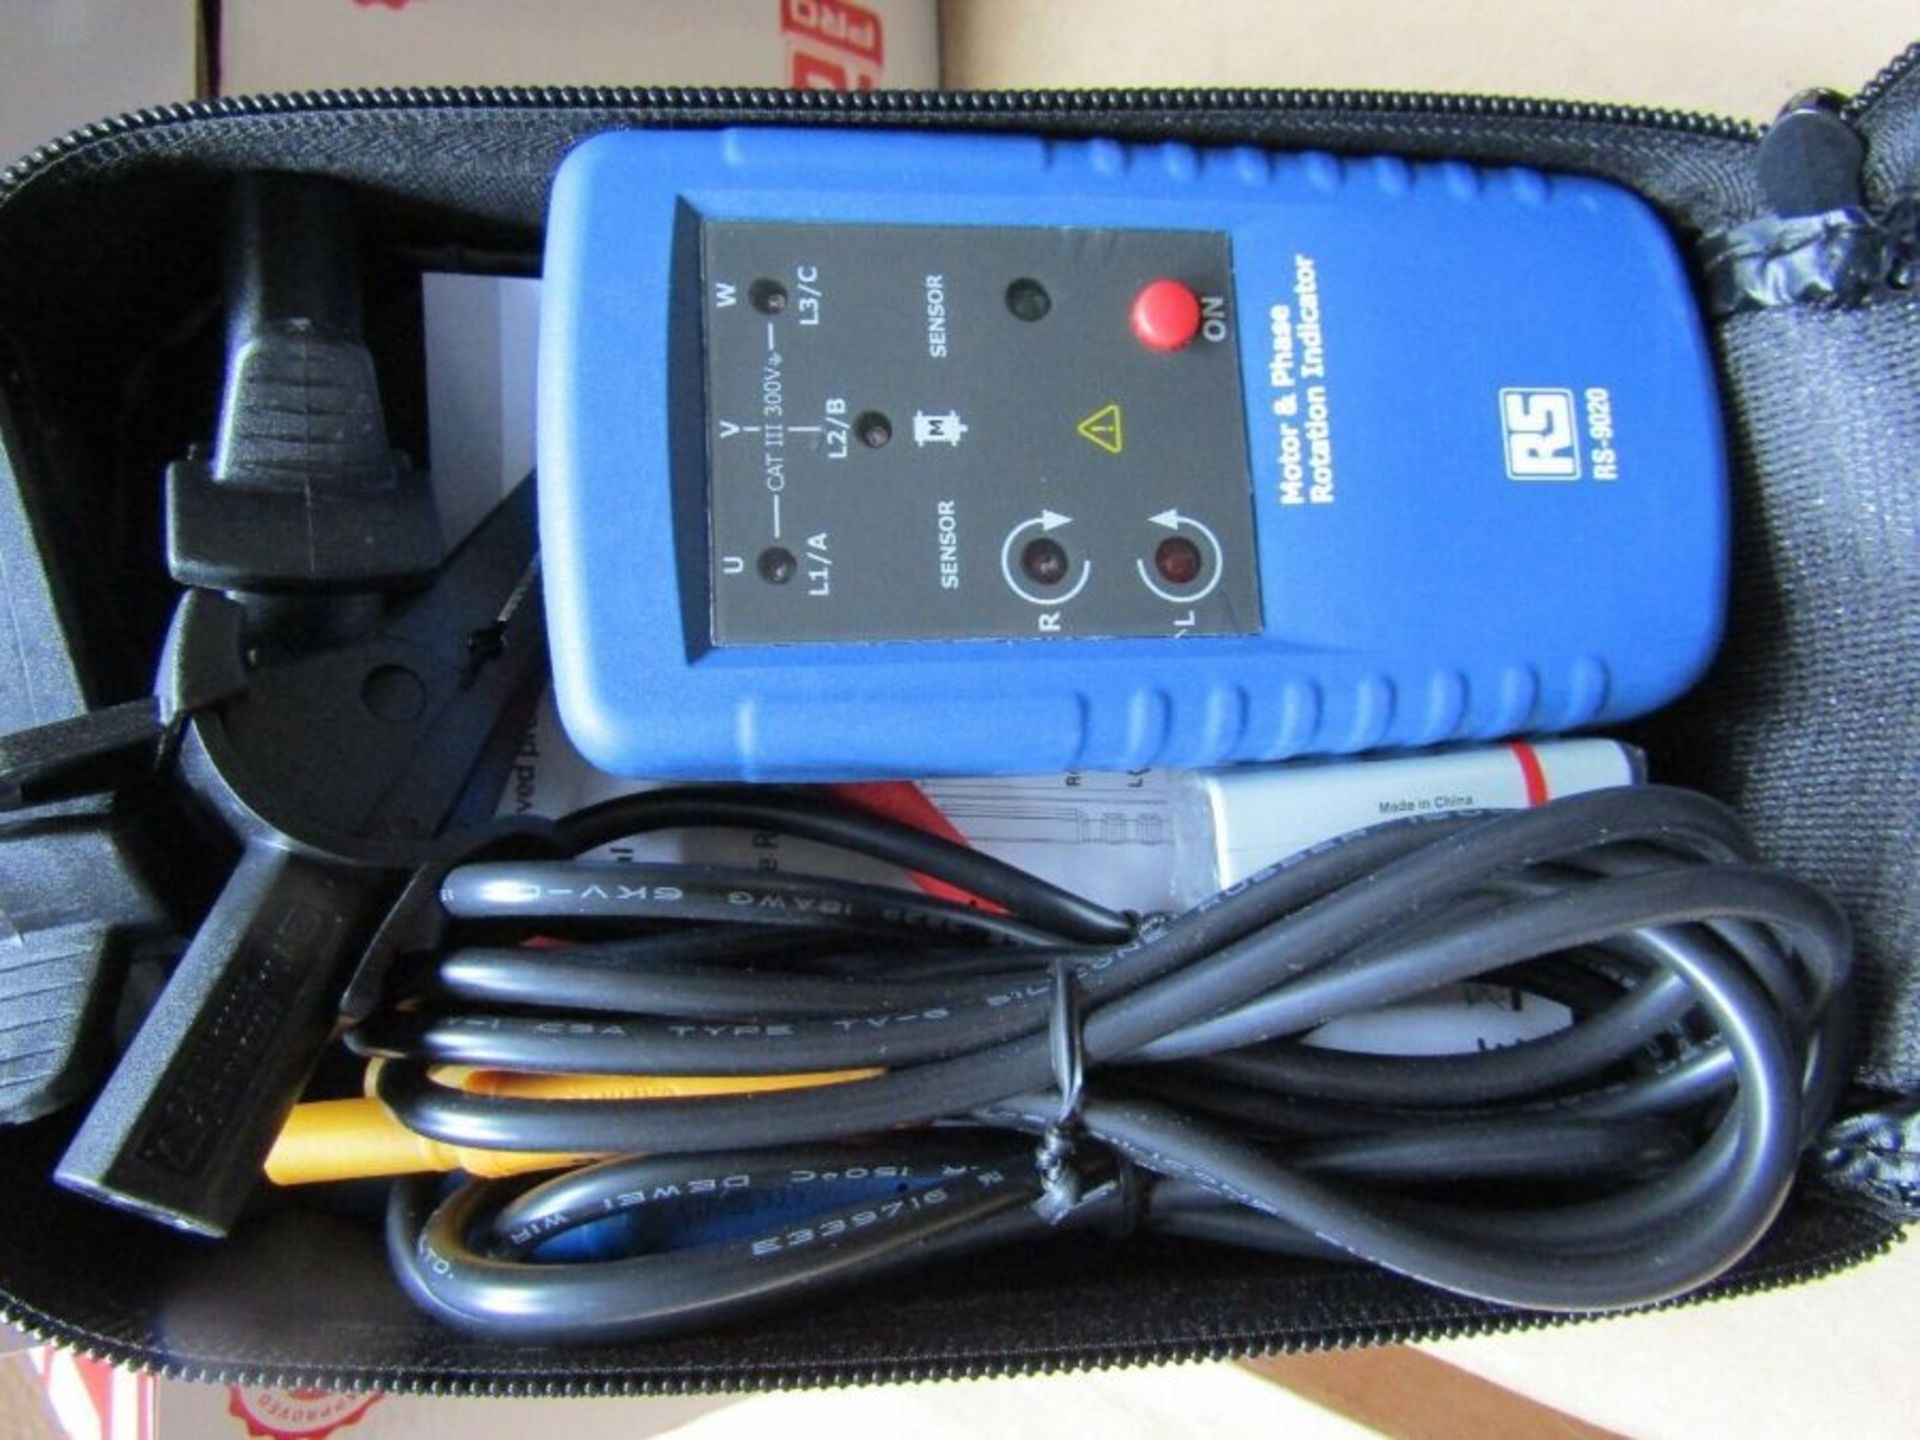 NEW RS Pro DT-902 Phase Rotation Tester CAT III 300V 400Hz 400Vac S4 8937919